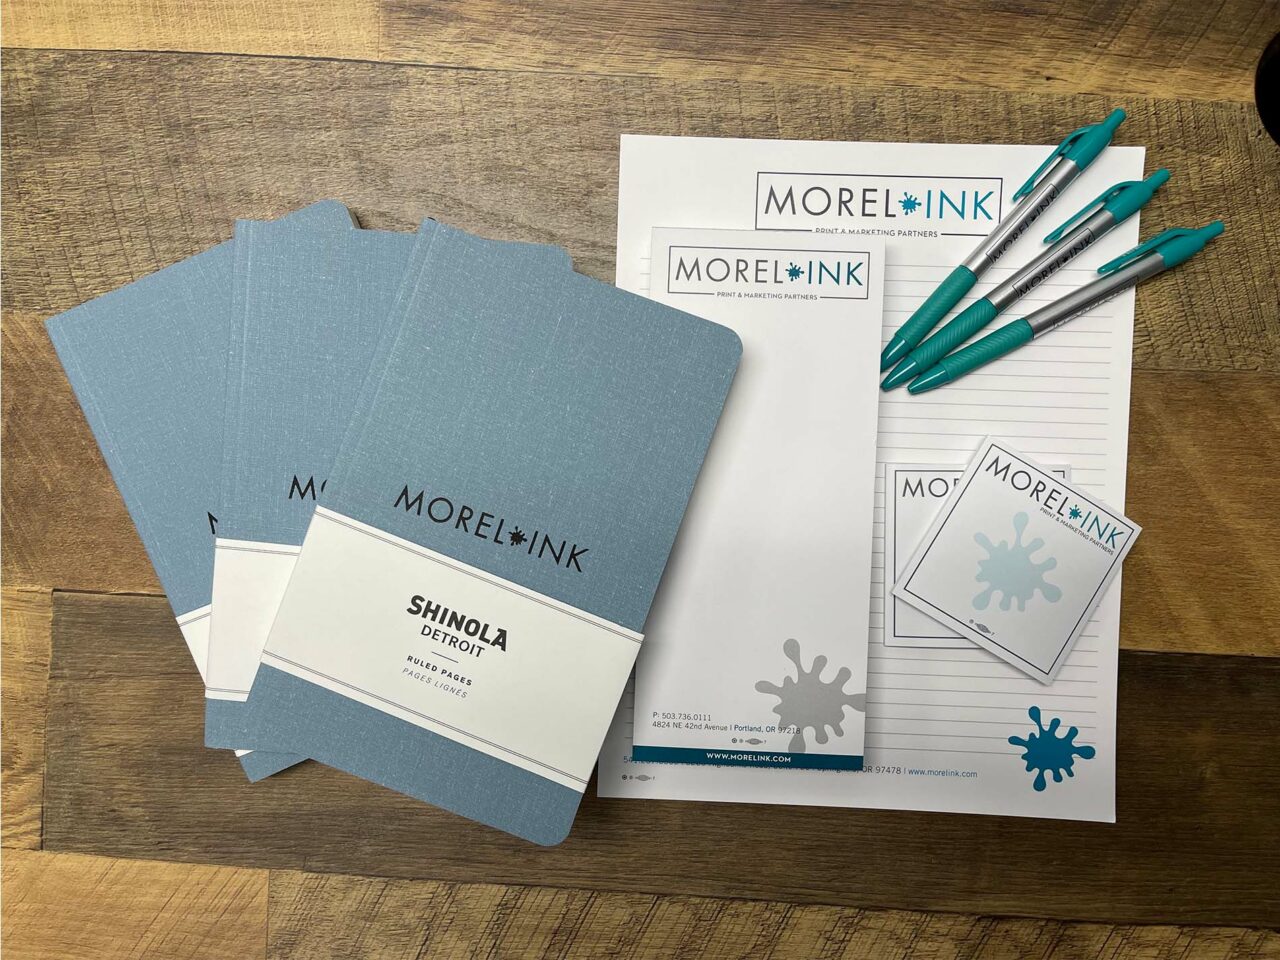 Example of Morel's print and promotional capabilities, showing branded pens, notebooks, notepads, and stickies.